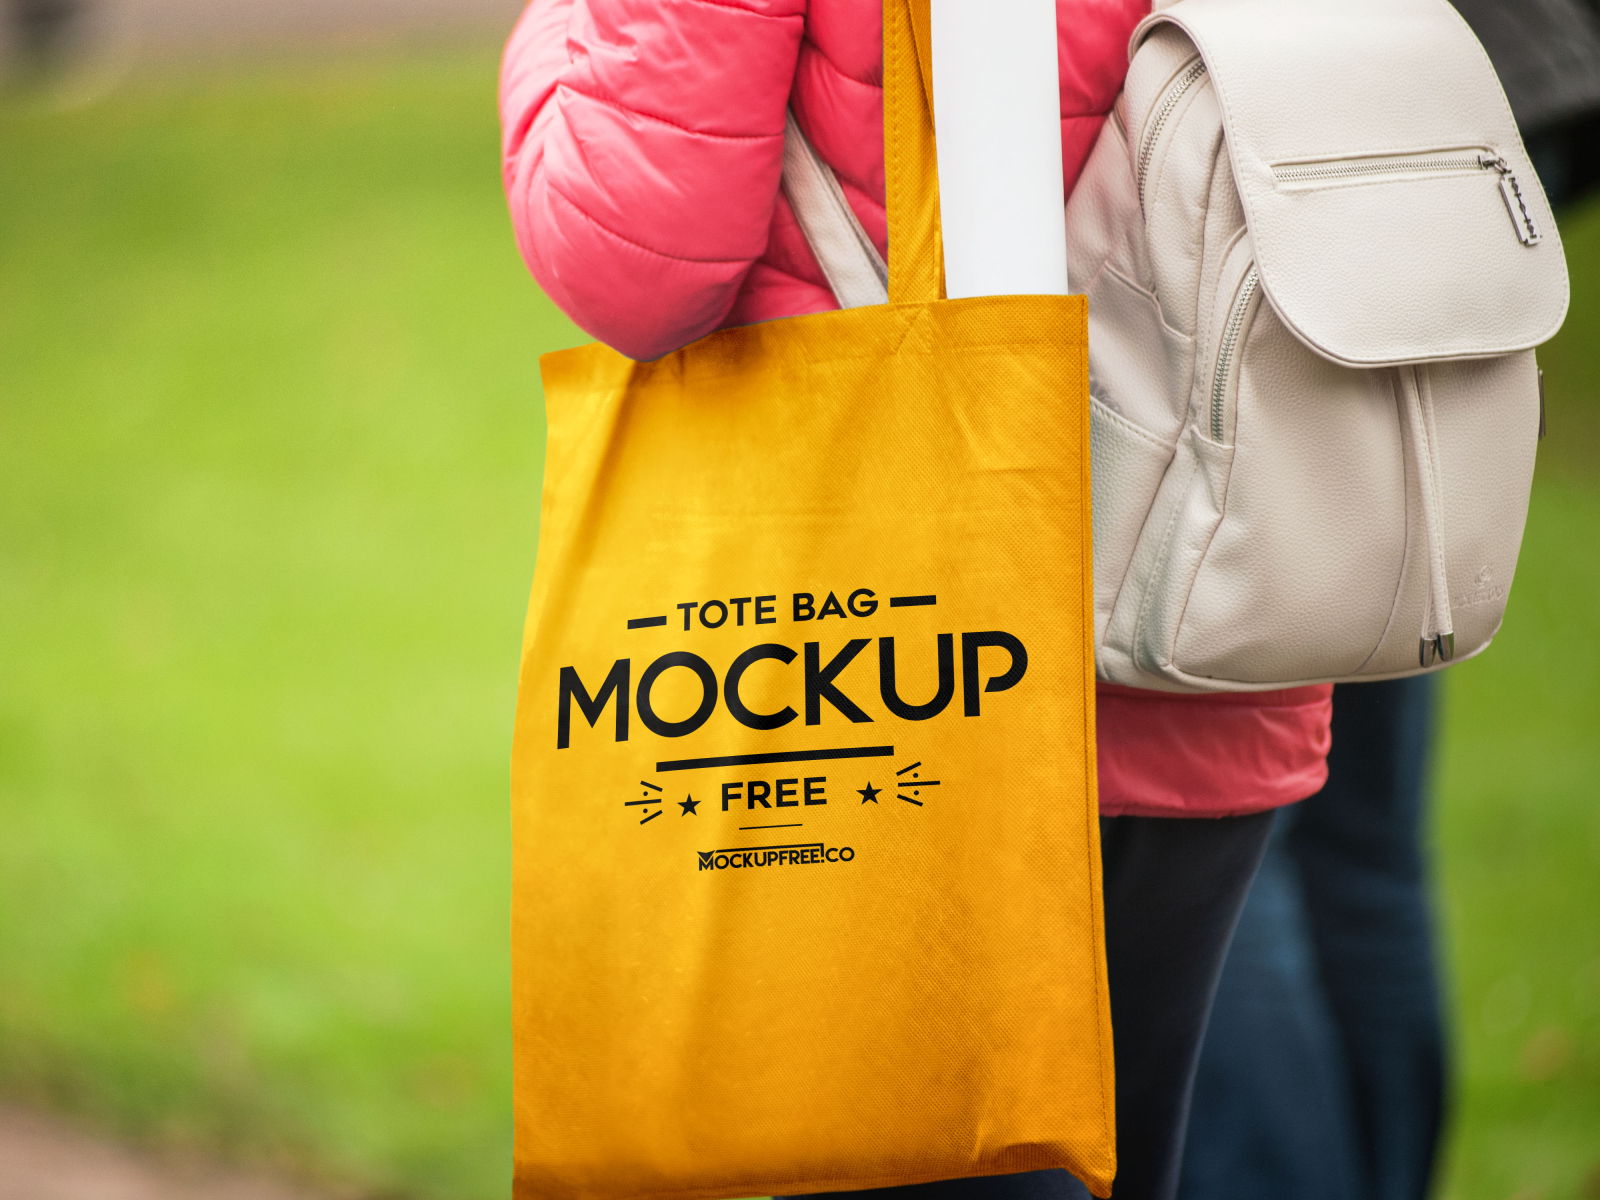 Download Free Tote Bag Mockup Template by Mockupfree on Dribbble